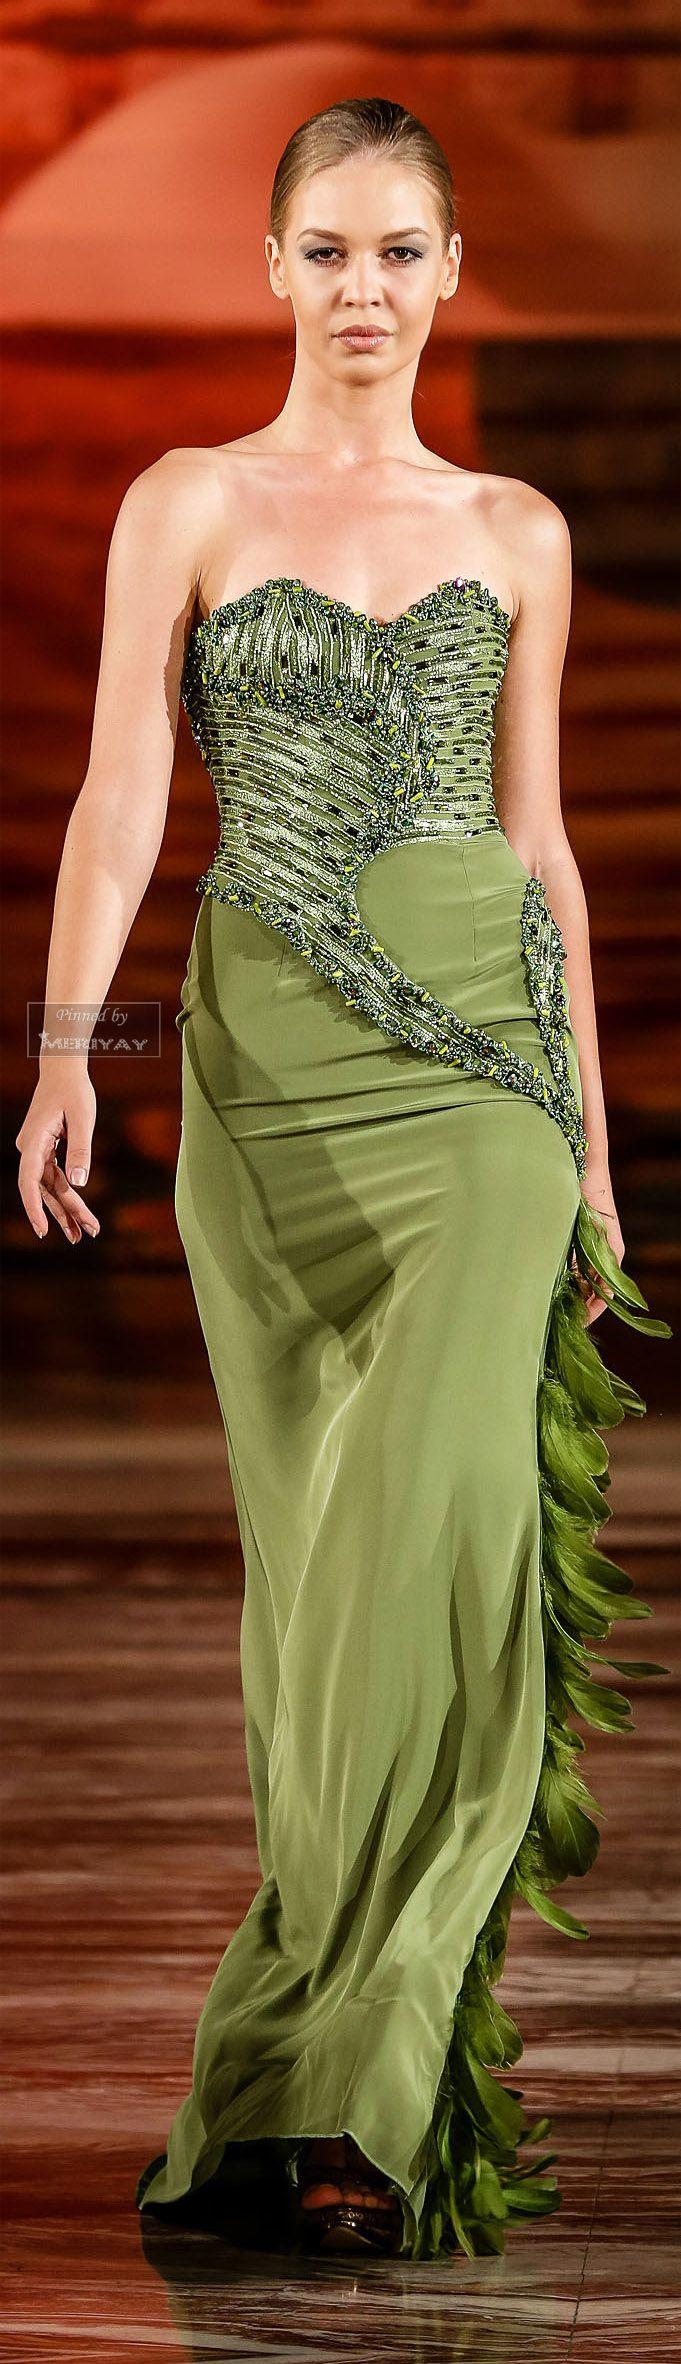 Wedding - Gowns.....Gorgeous Greens - New